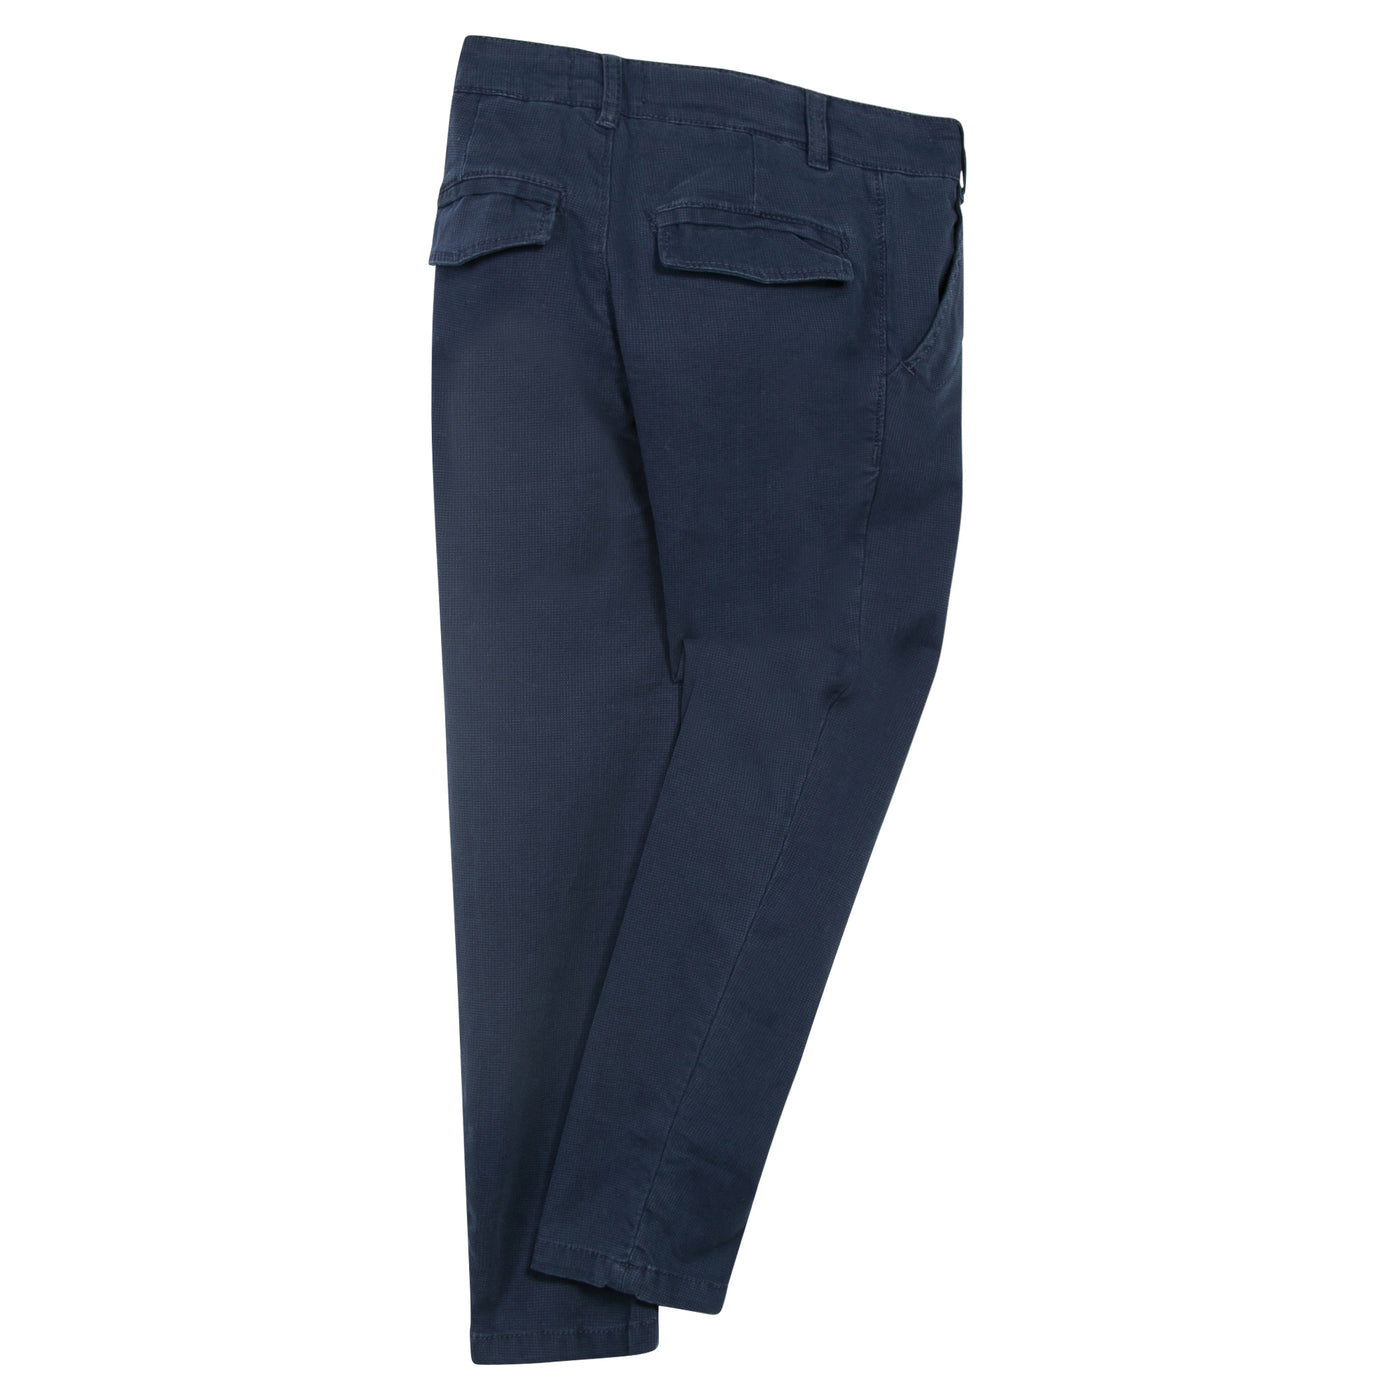 Jean Bourget Kids Boy's Chino Fit Pants in Navy